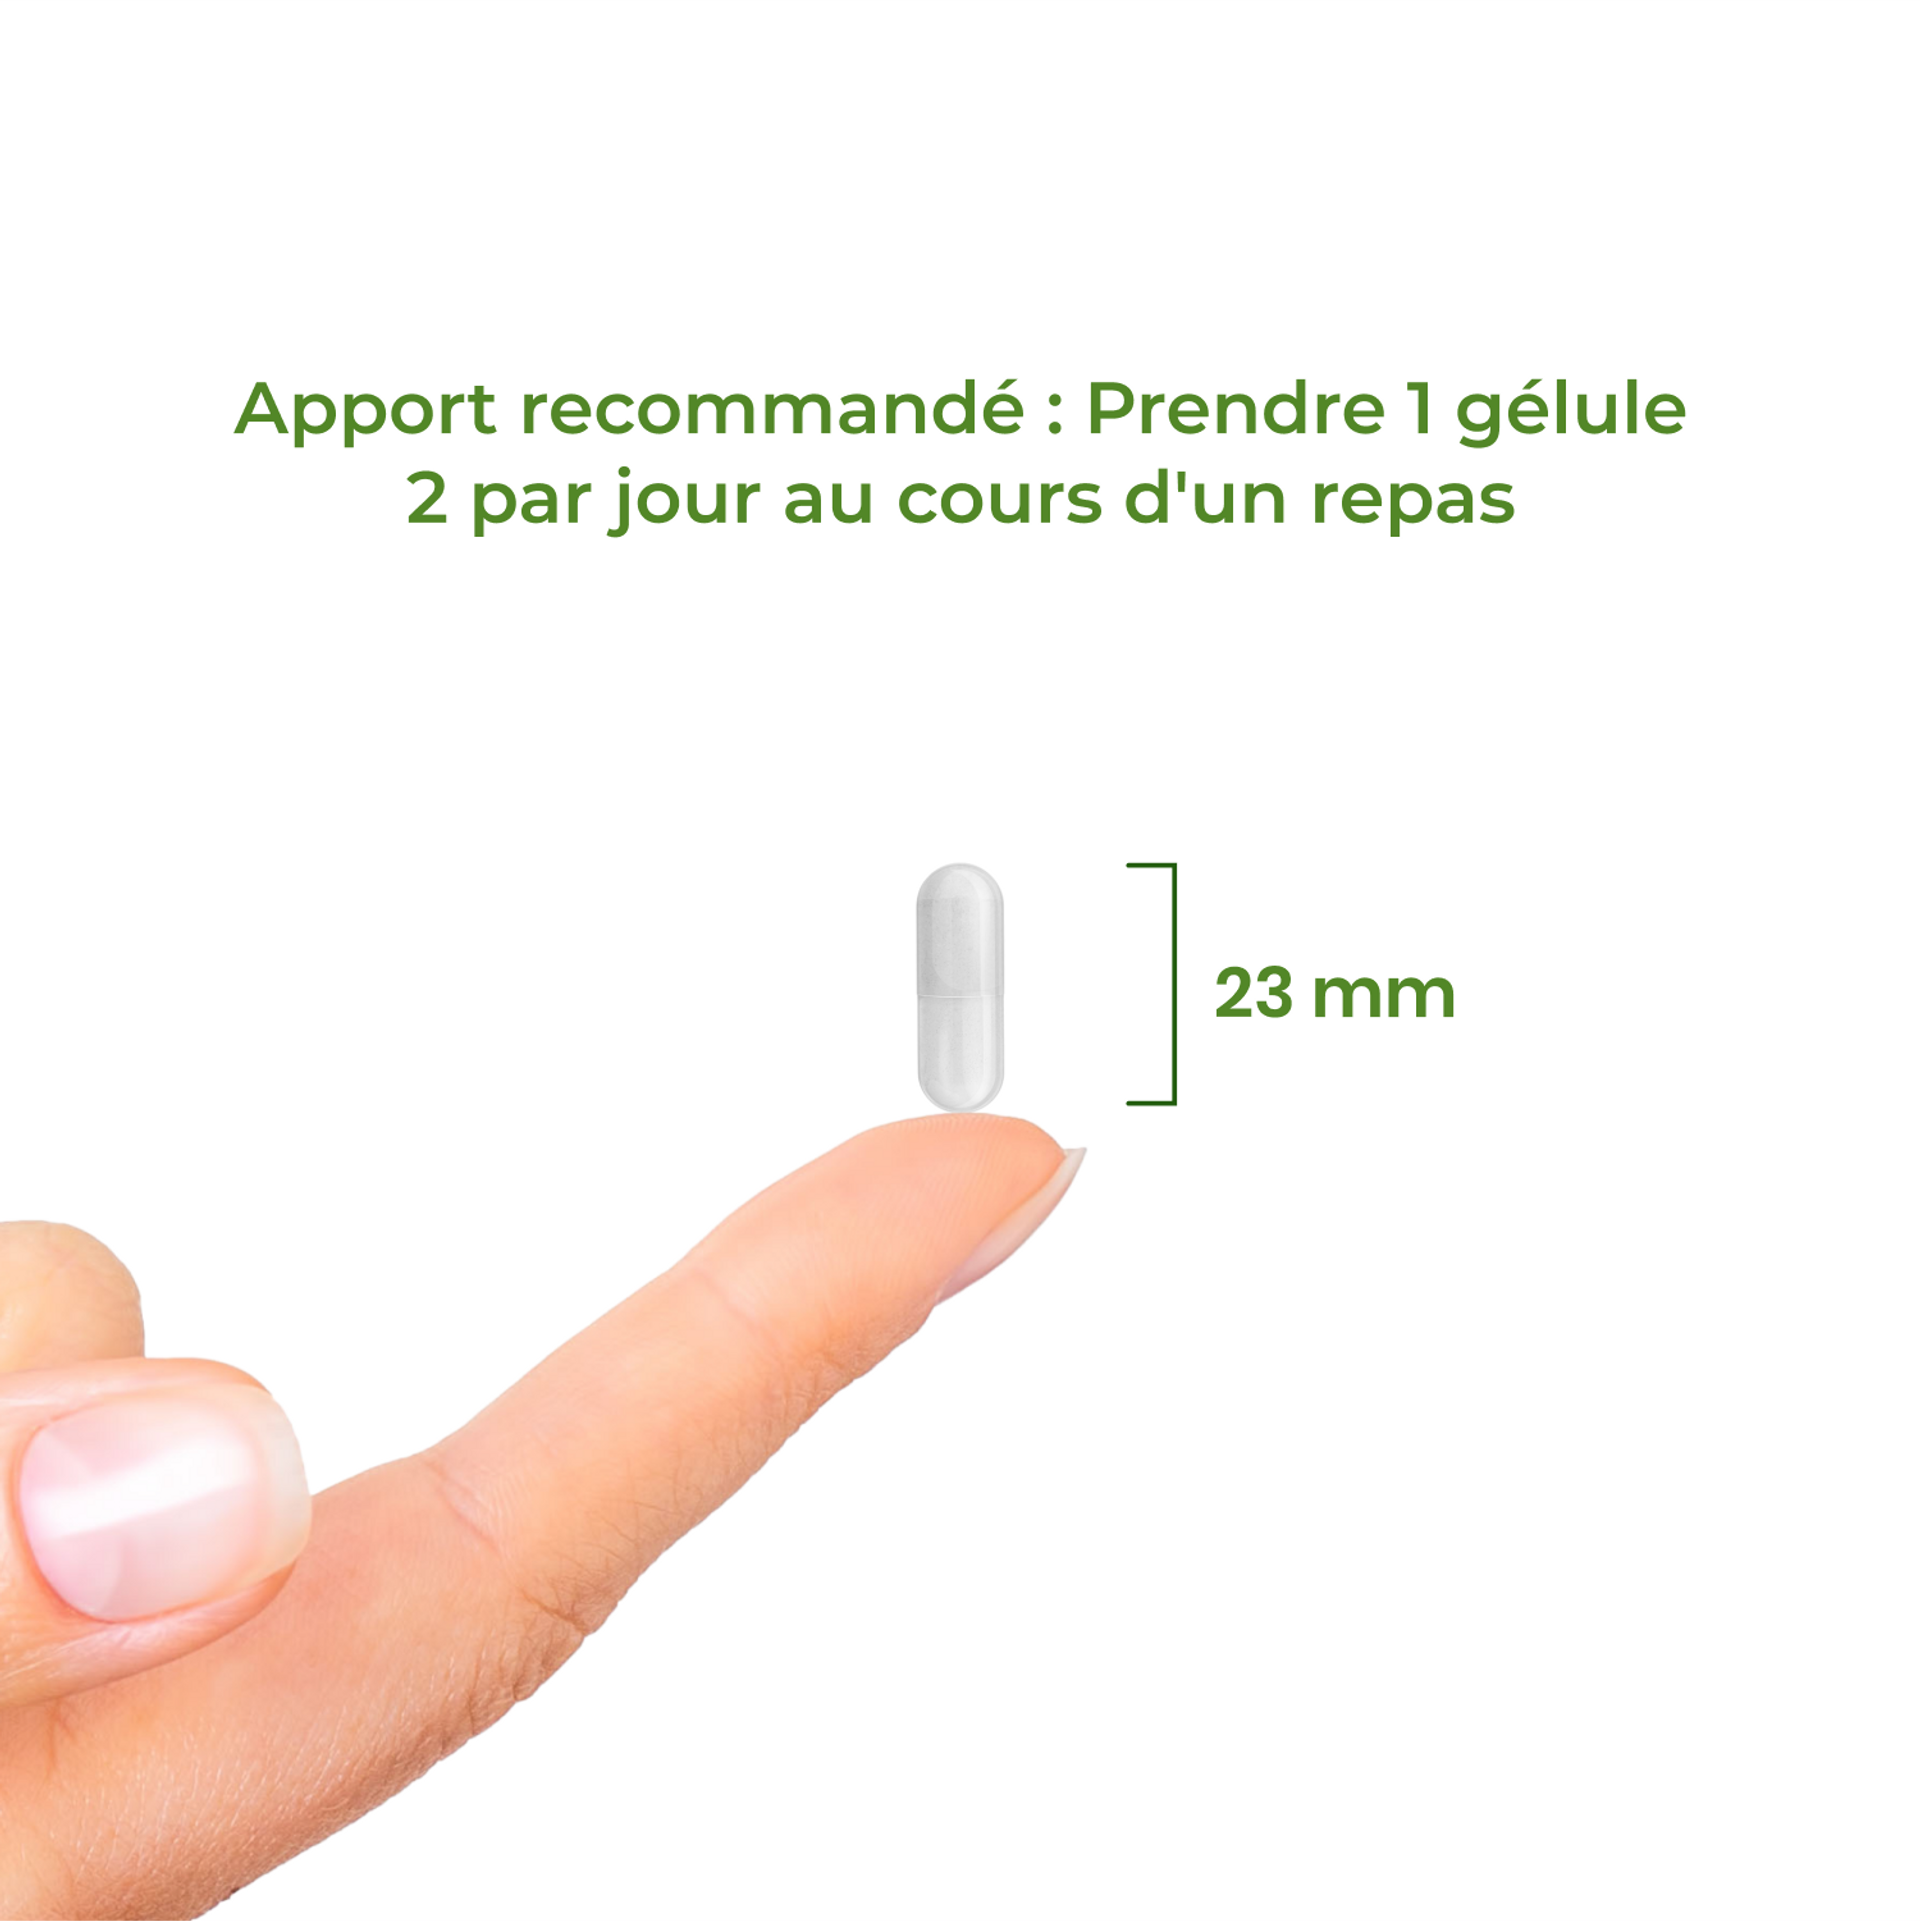 6_FR_Dosage_Magnesium Synergy_6813-04.png